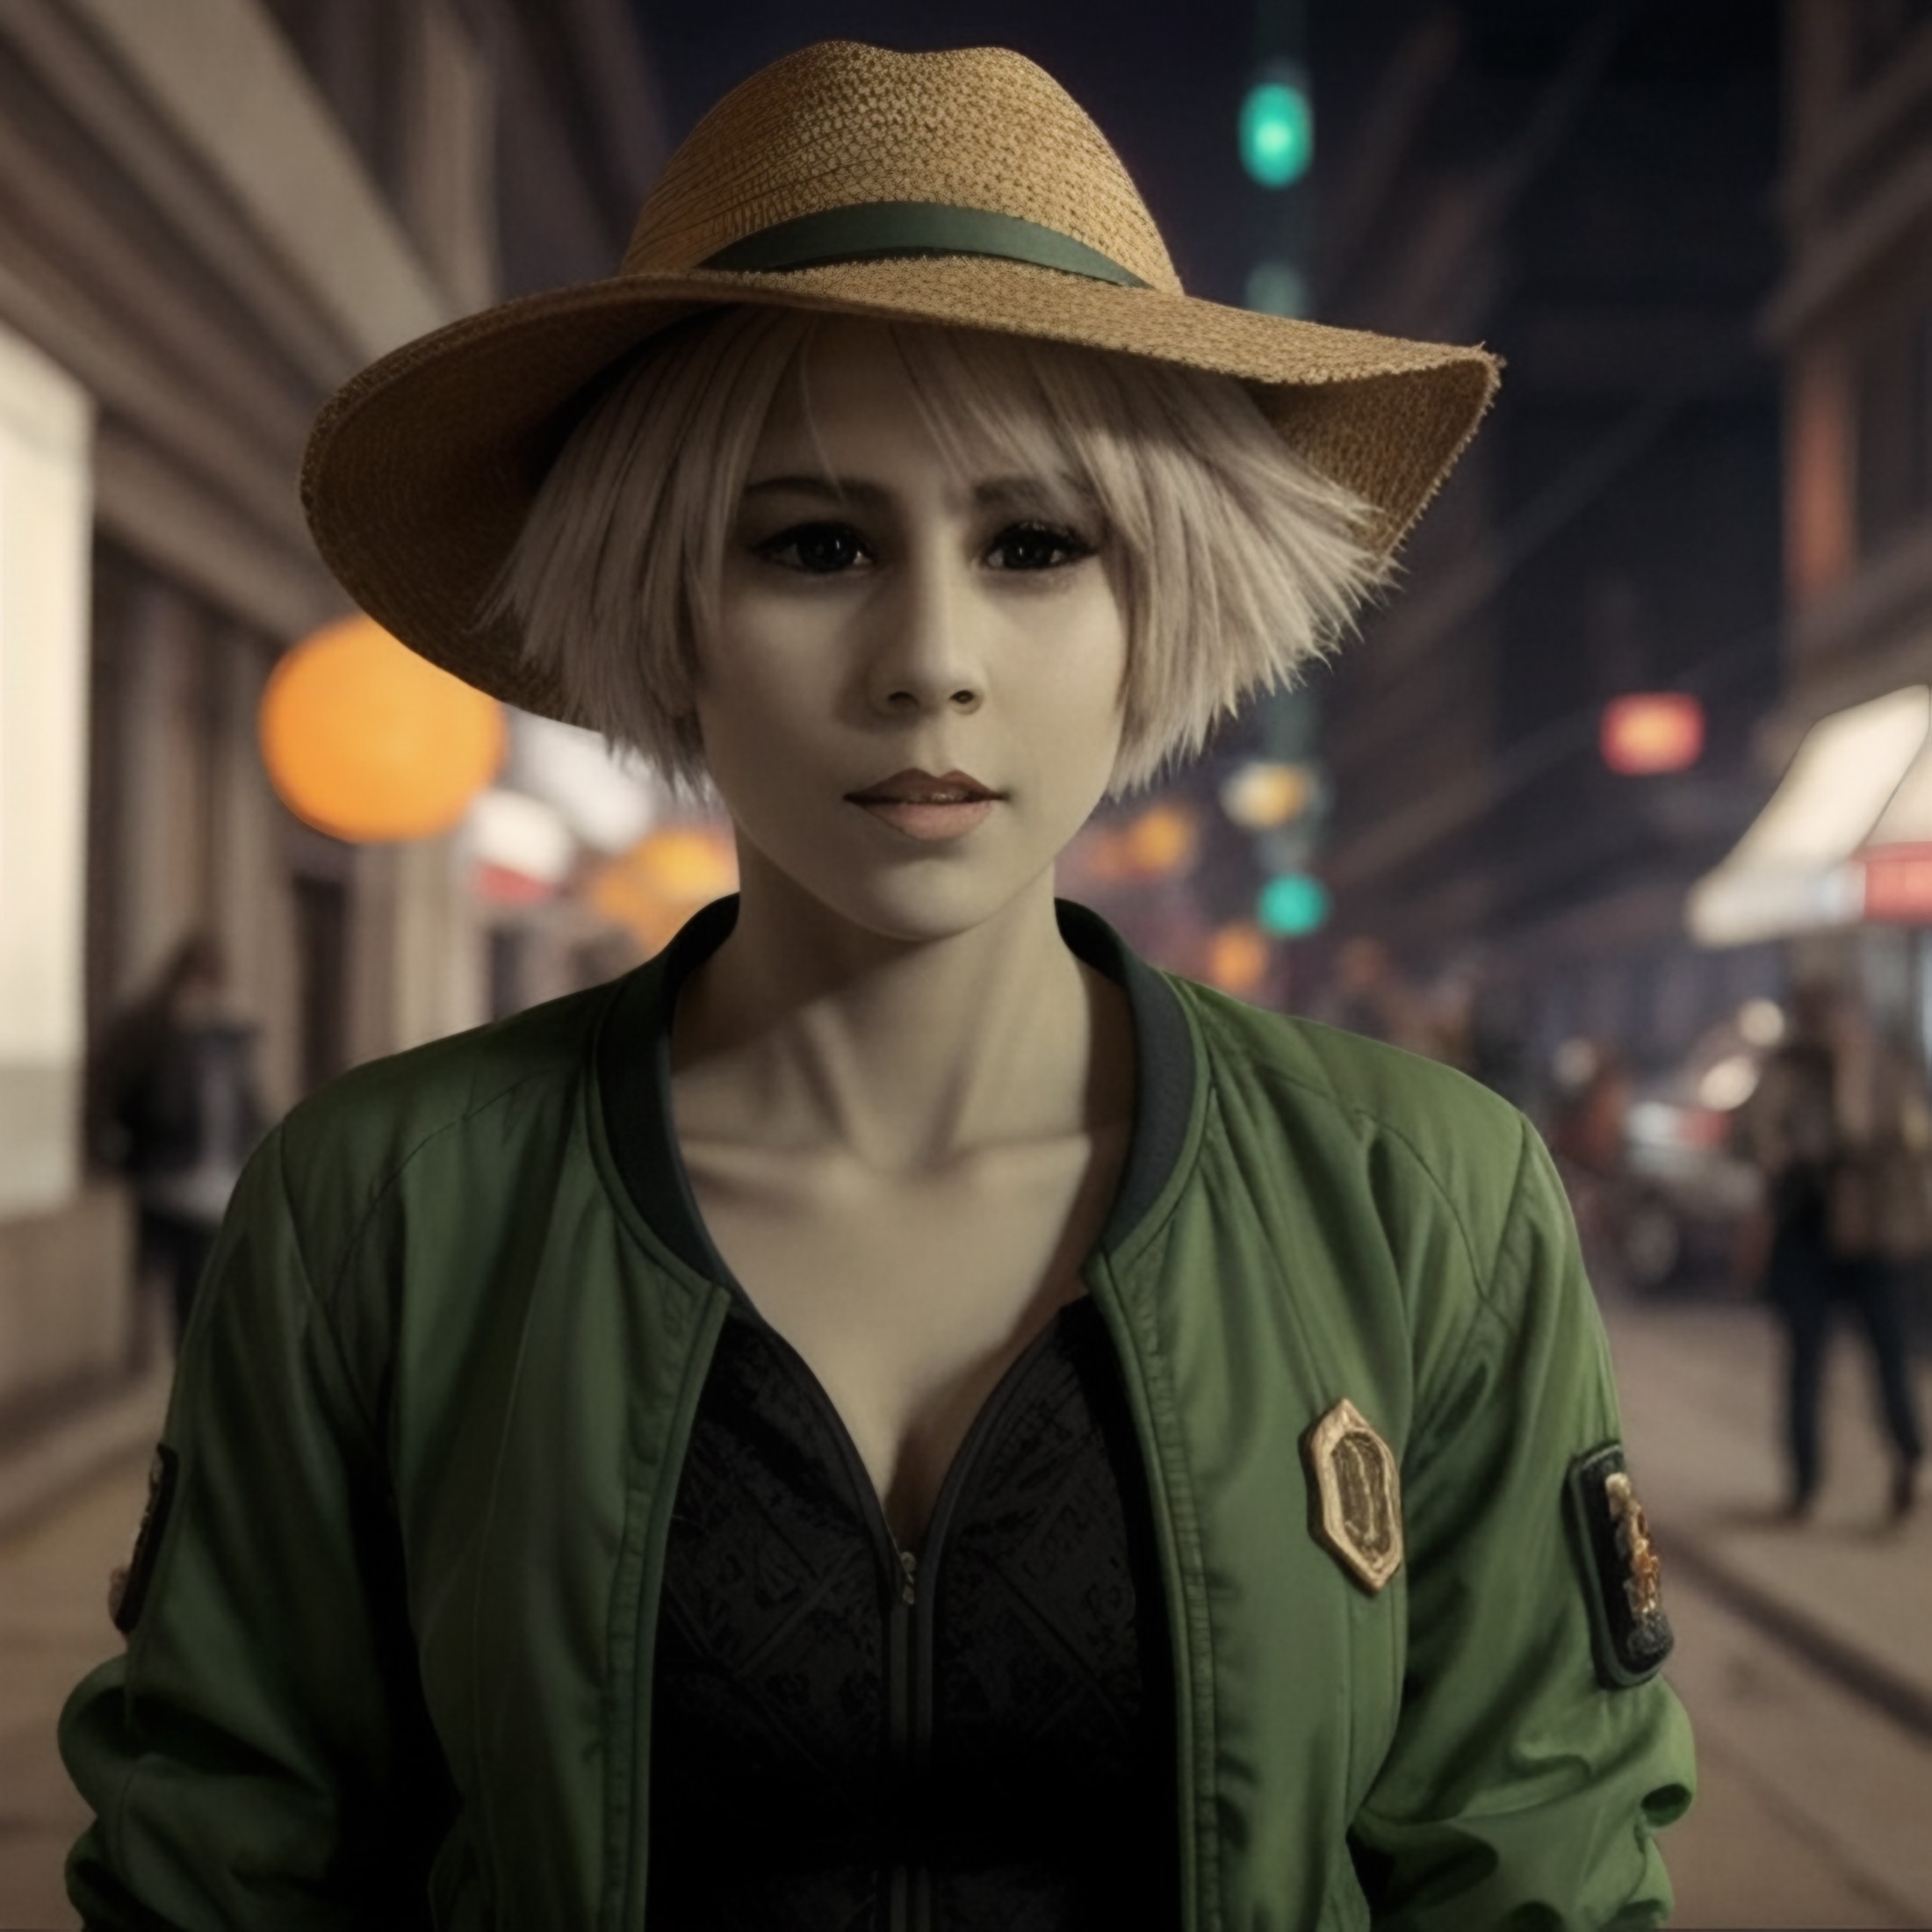 ((DSLR Photo)), ((realistic))), wearing a straw hat, ChianaFarscape, wearing a green bomber jacket, from nearby, (front vi...